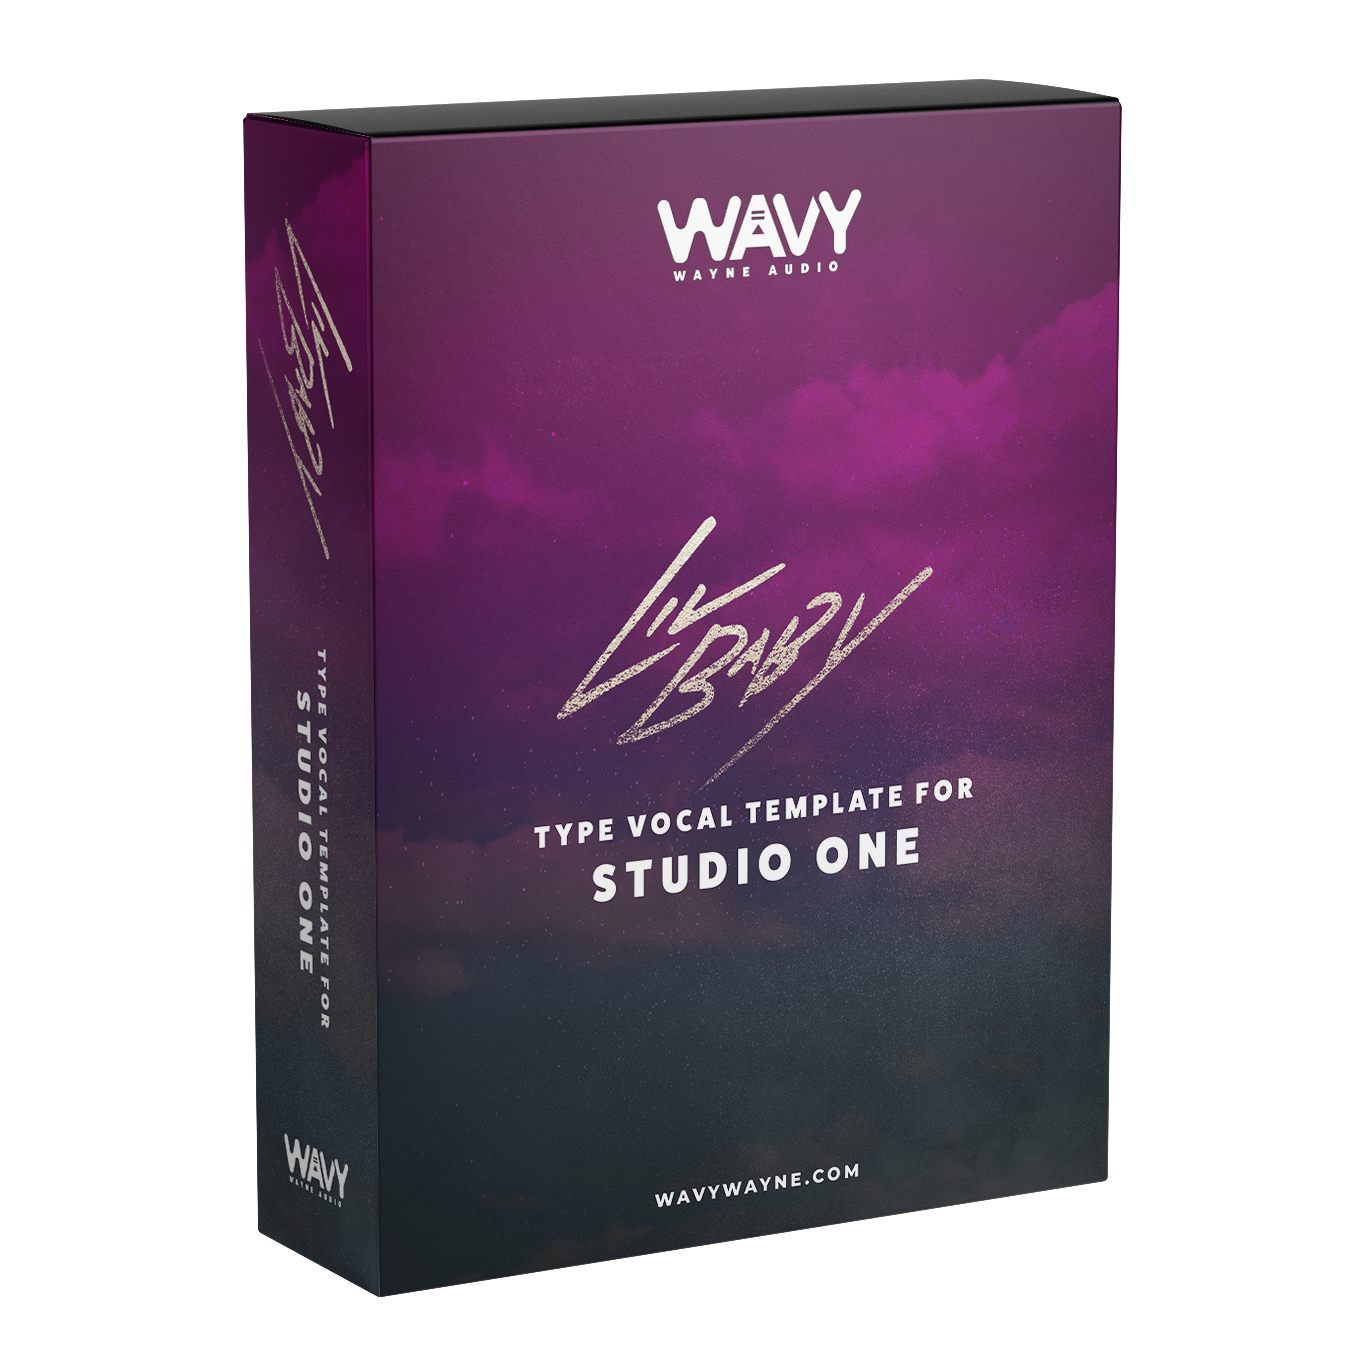 Lil Baby Type Vocal Template for Studio One